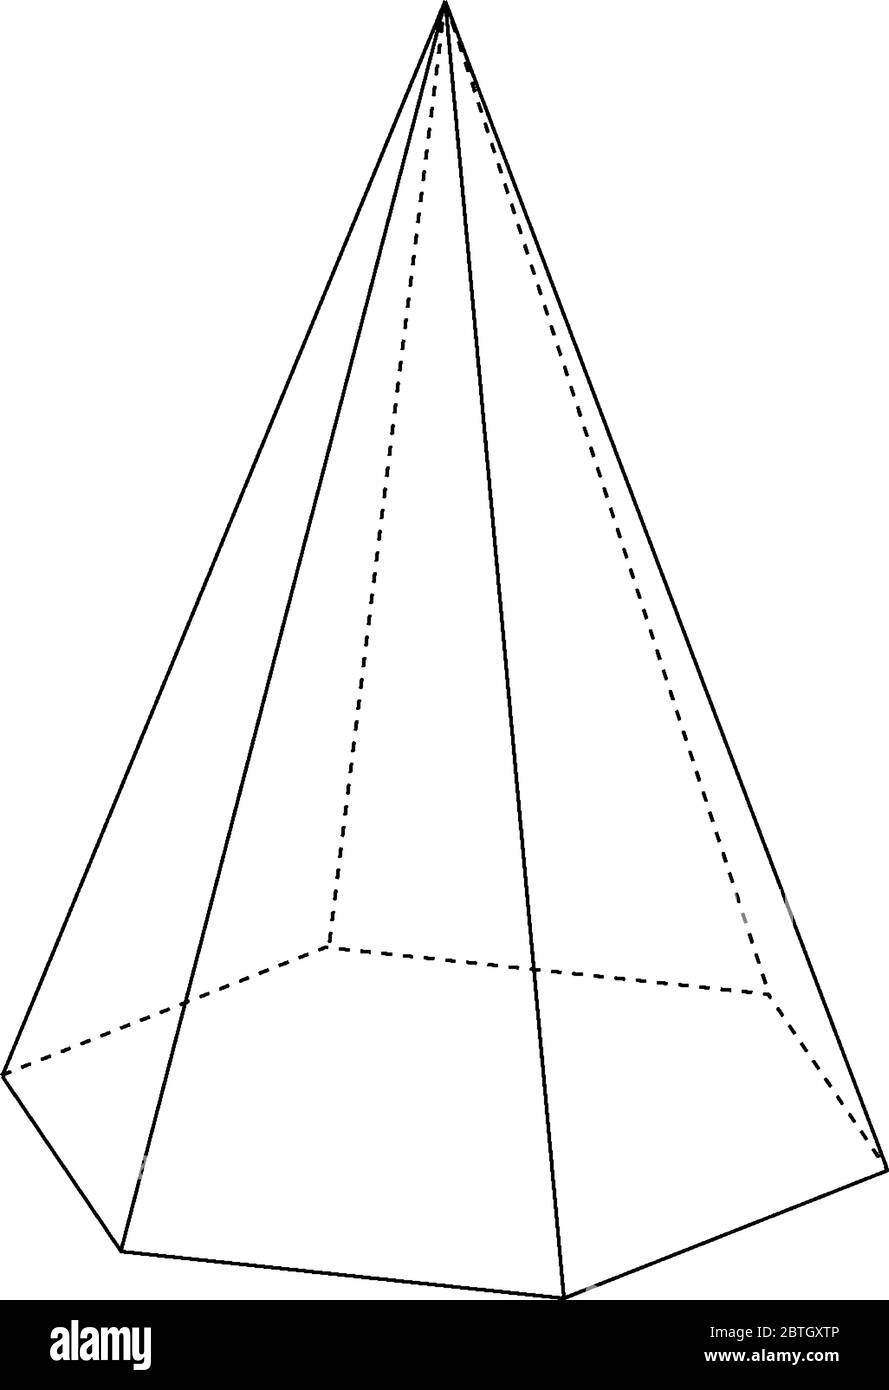 Illustration of a right hexagonal pyramid with hidden edges shown. The base is a hexagon and the faces are isosceles triangles., vintage line drawing Stock Vector